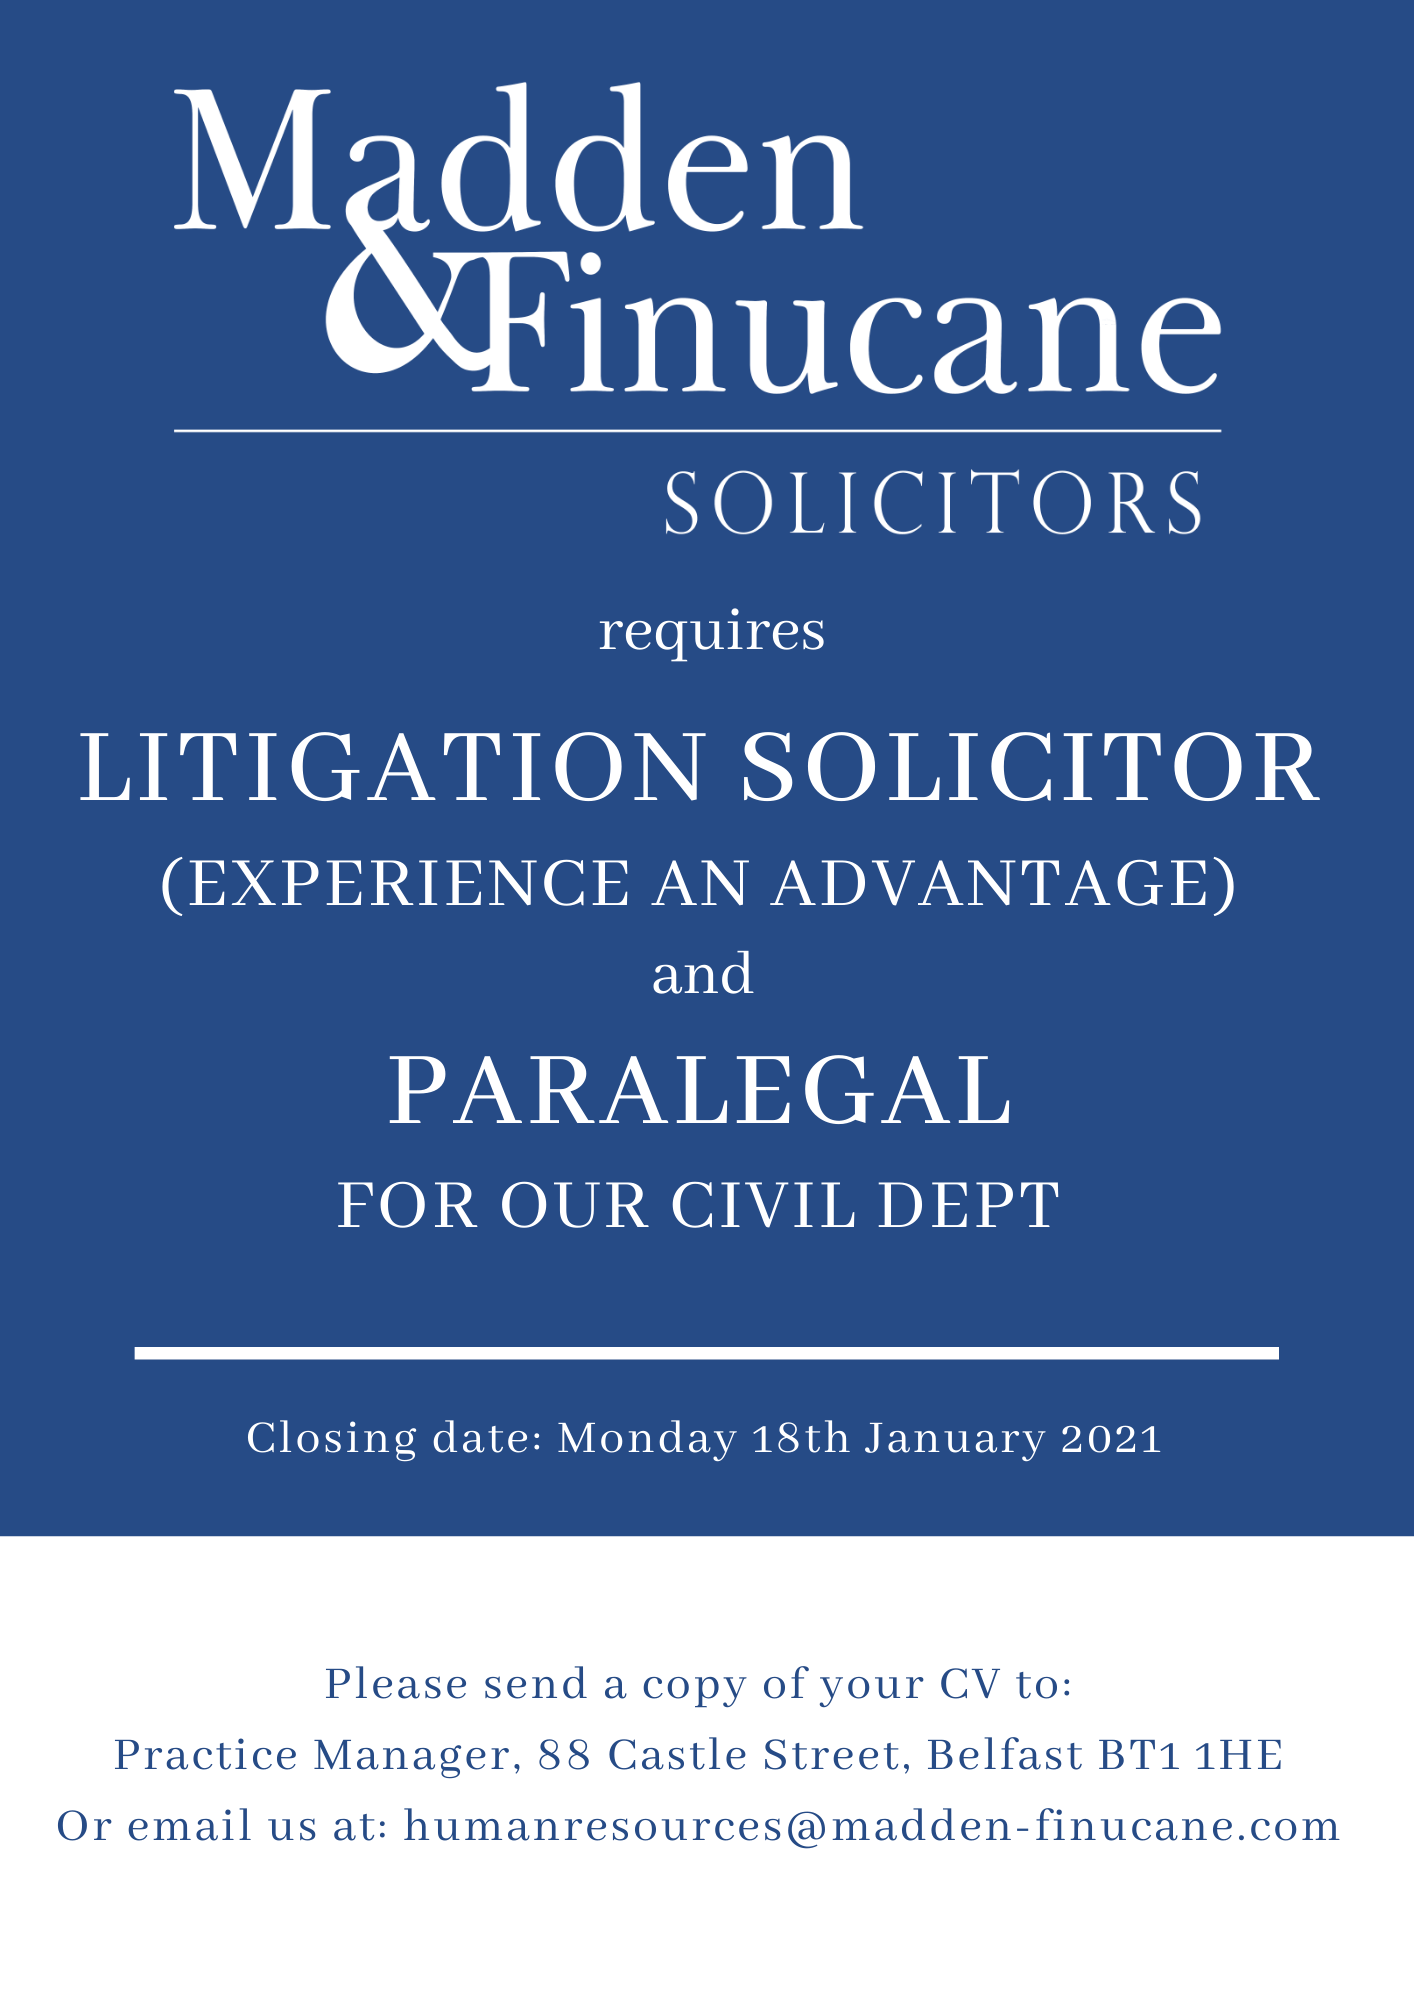 Job Opportunities at Madden & Finucane Solicitors